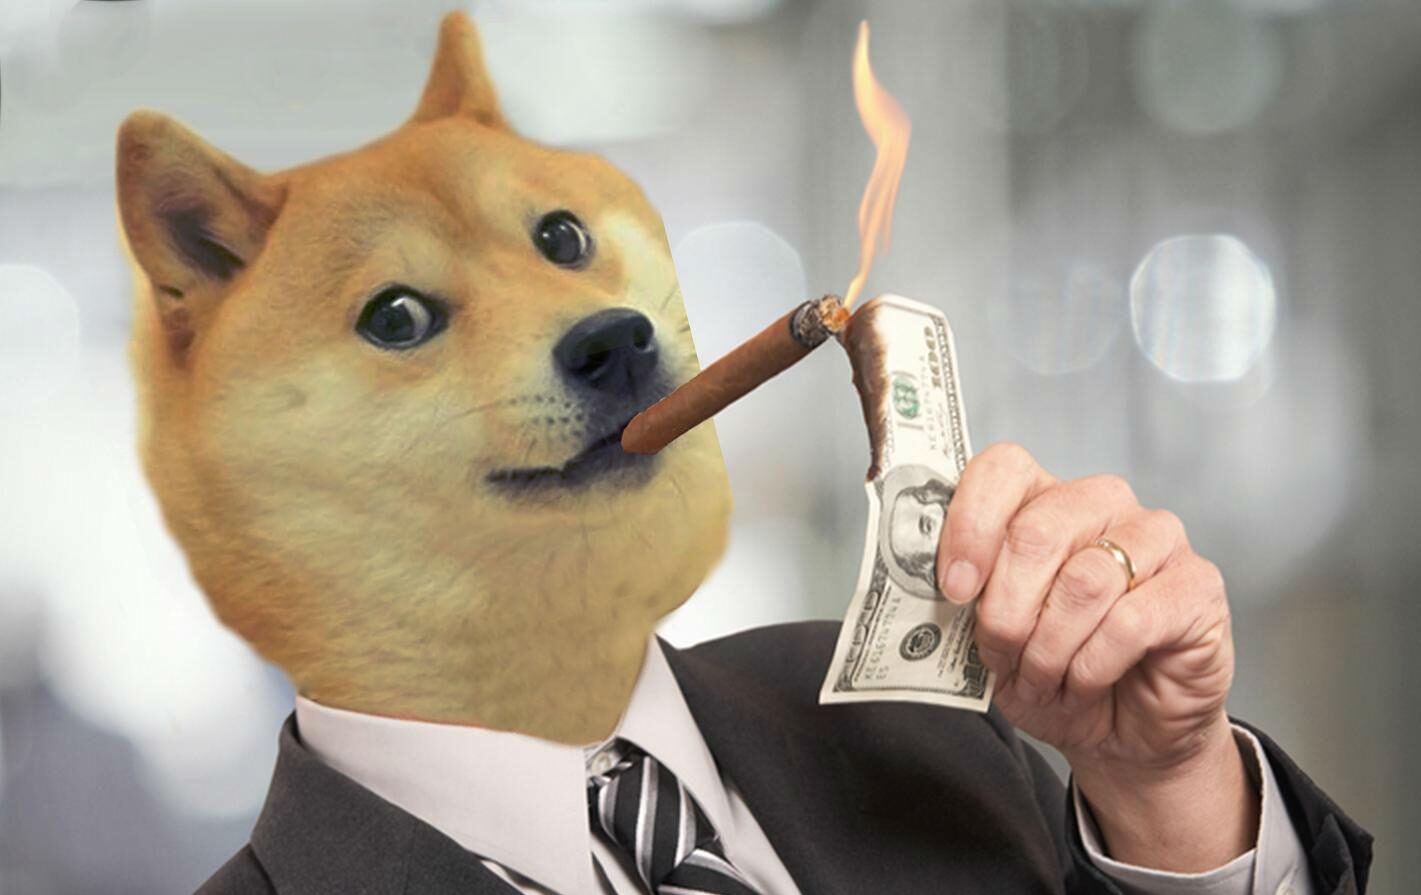 Daily transactions on the Doge network hits record high because of "Doginals" 24